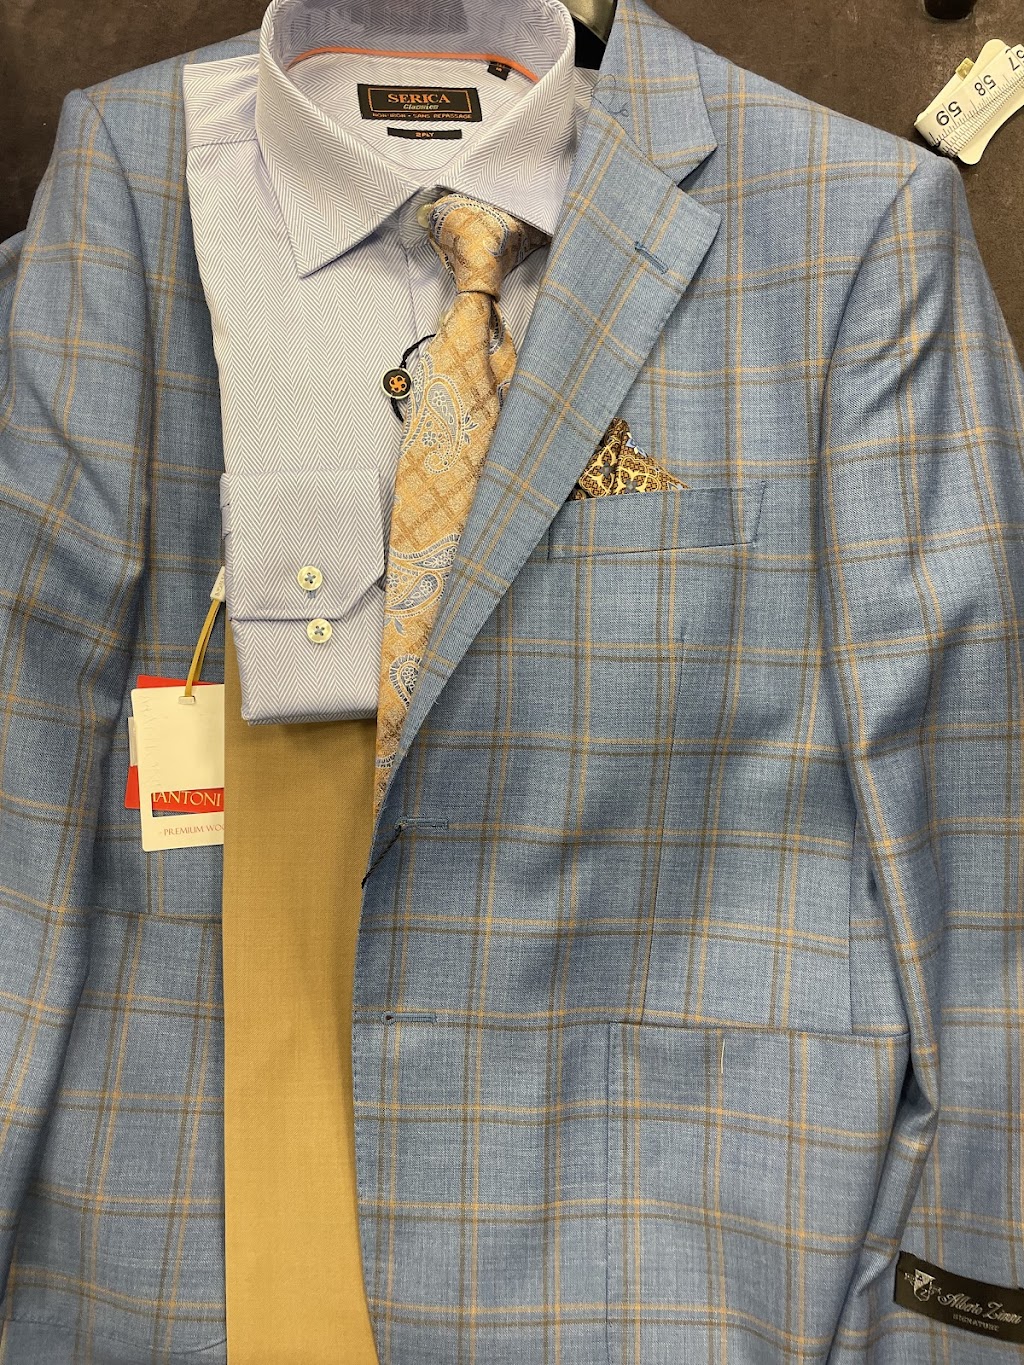 Ticknors Mens Clothier - Crabtree Valley Mall | 4325 Glenwood Ave, Raleigh, NC 27612, USA | Phone: (919) 786-9850